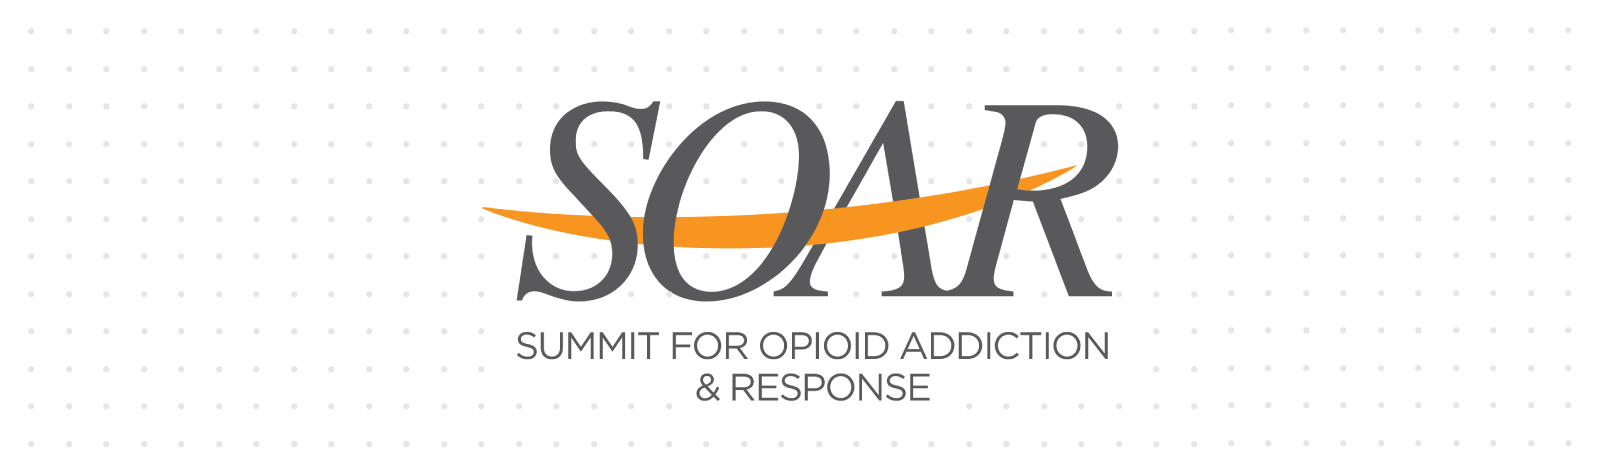 SOAR: Summit for Opioid Addiction and Response